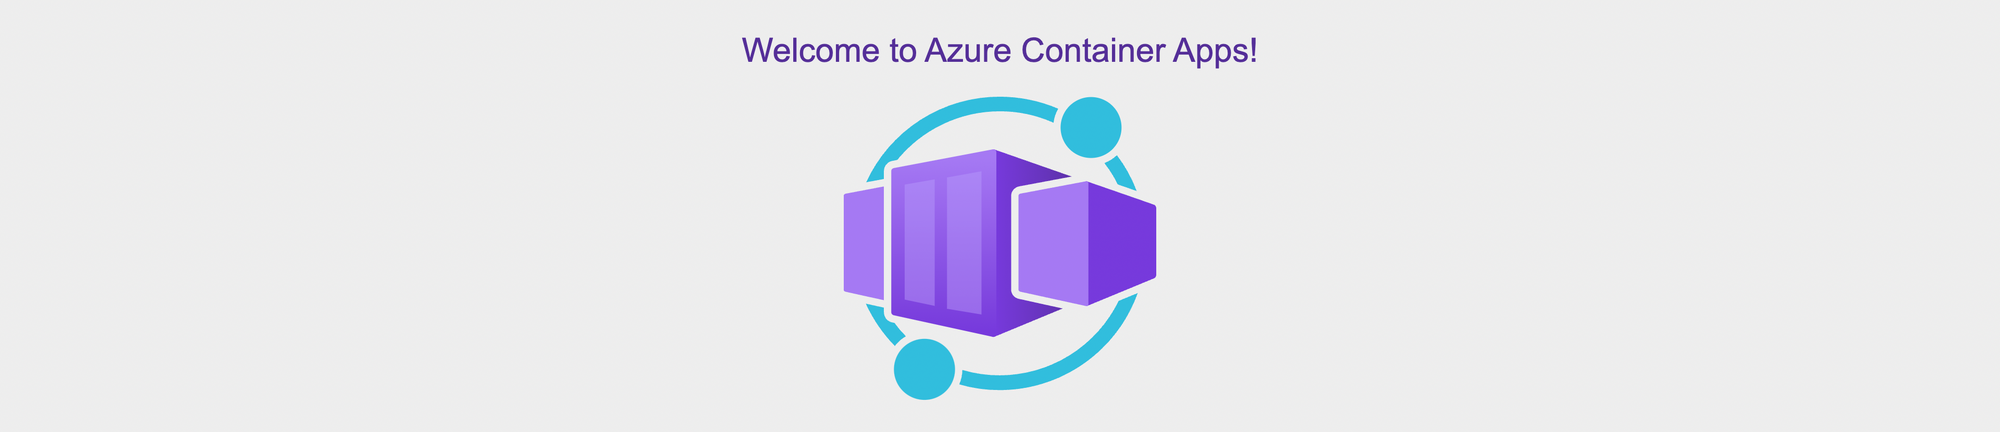 The container app page